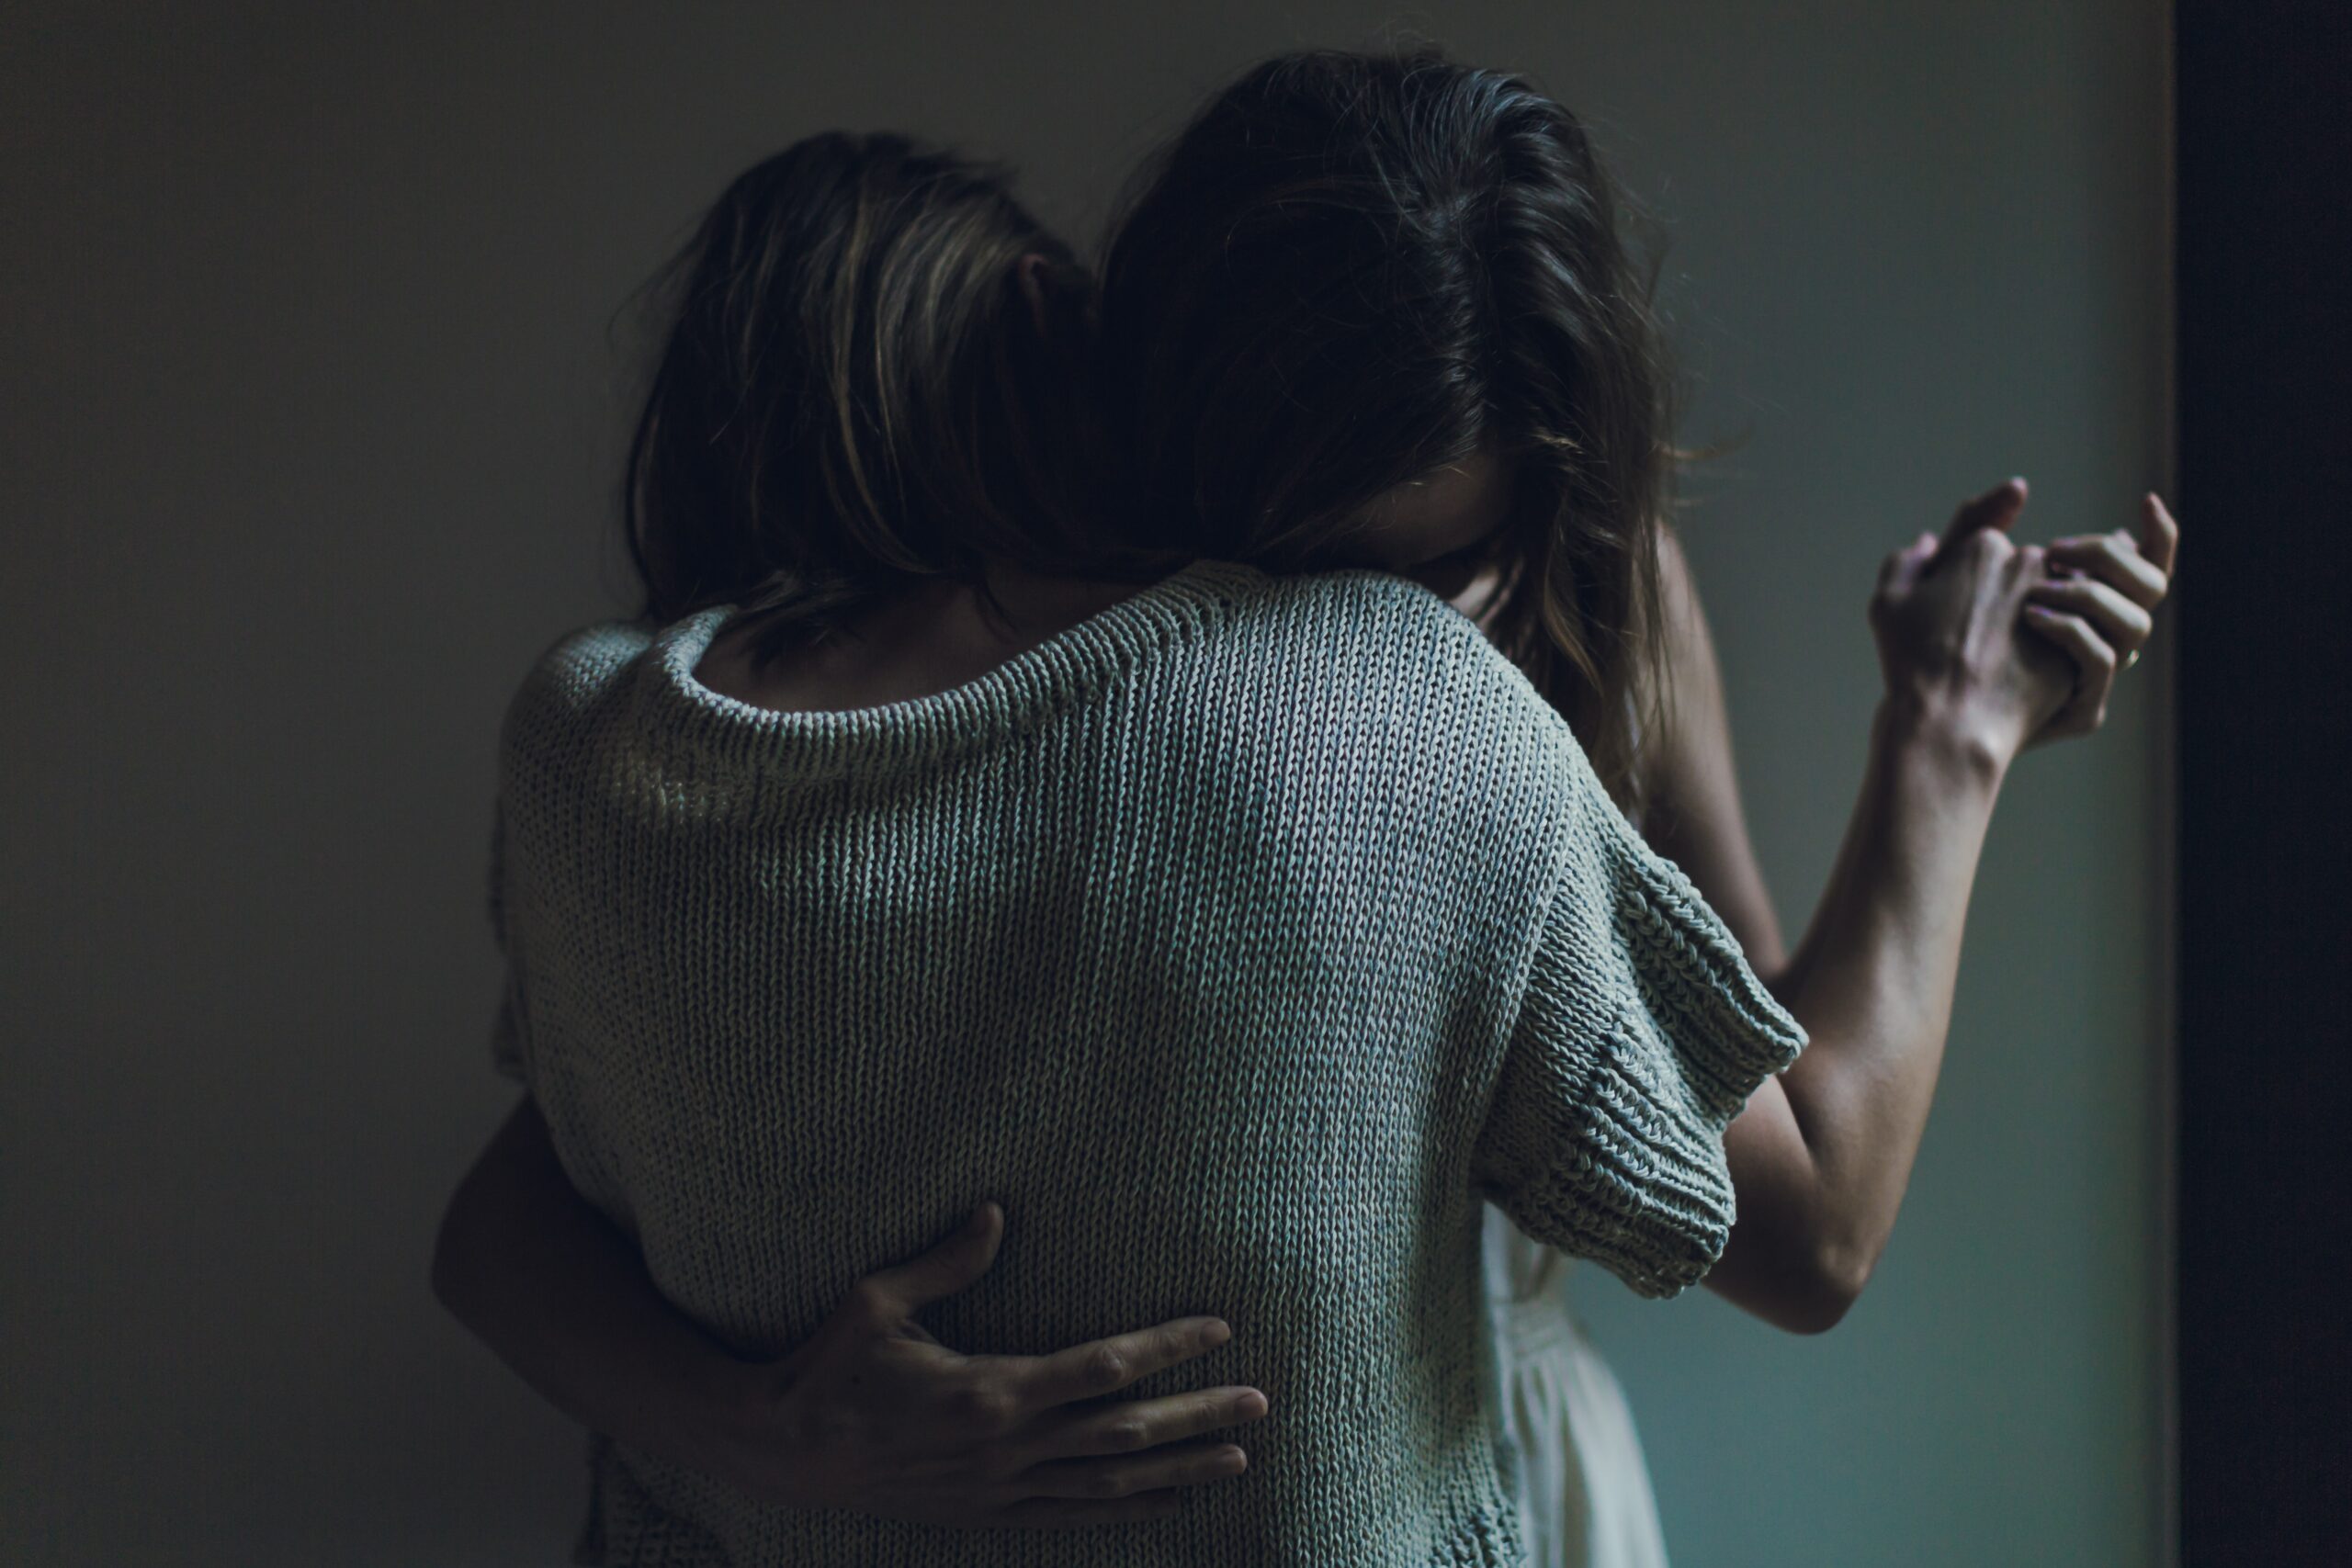 Two women, who are desperately hugging each other.